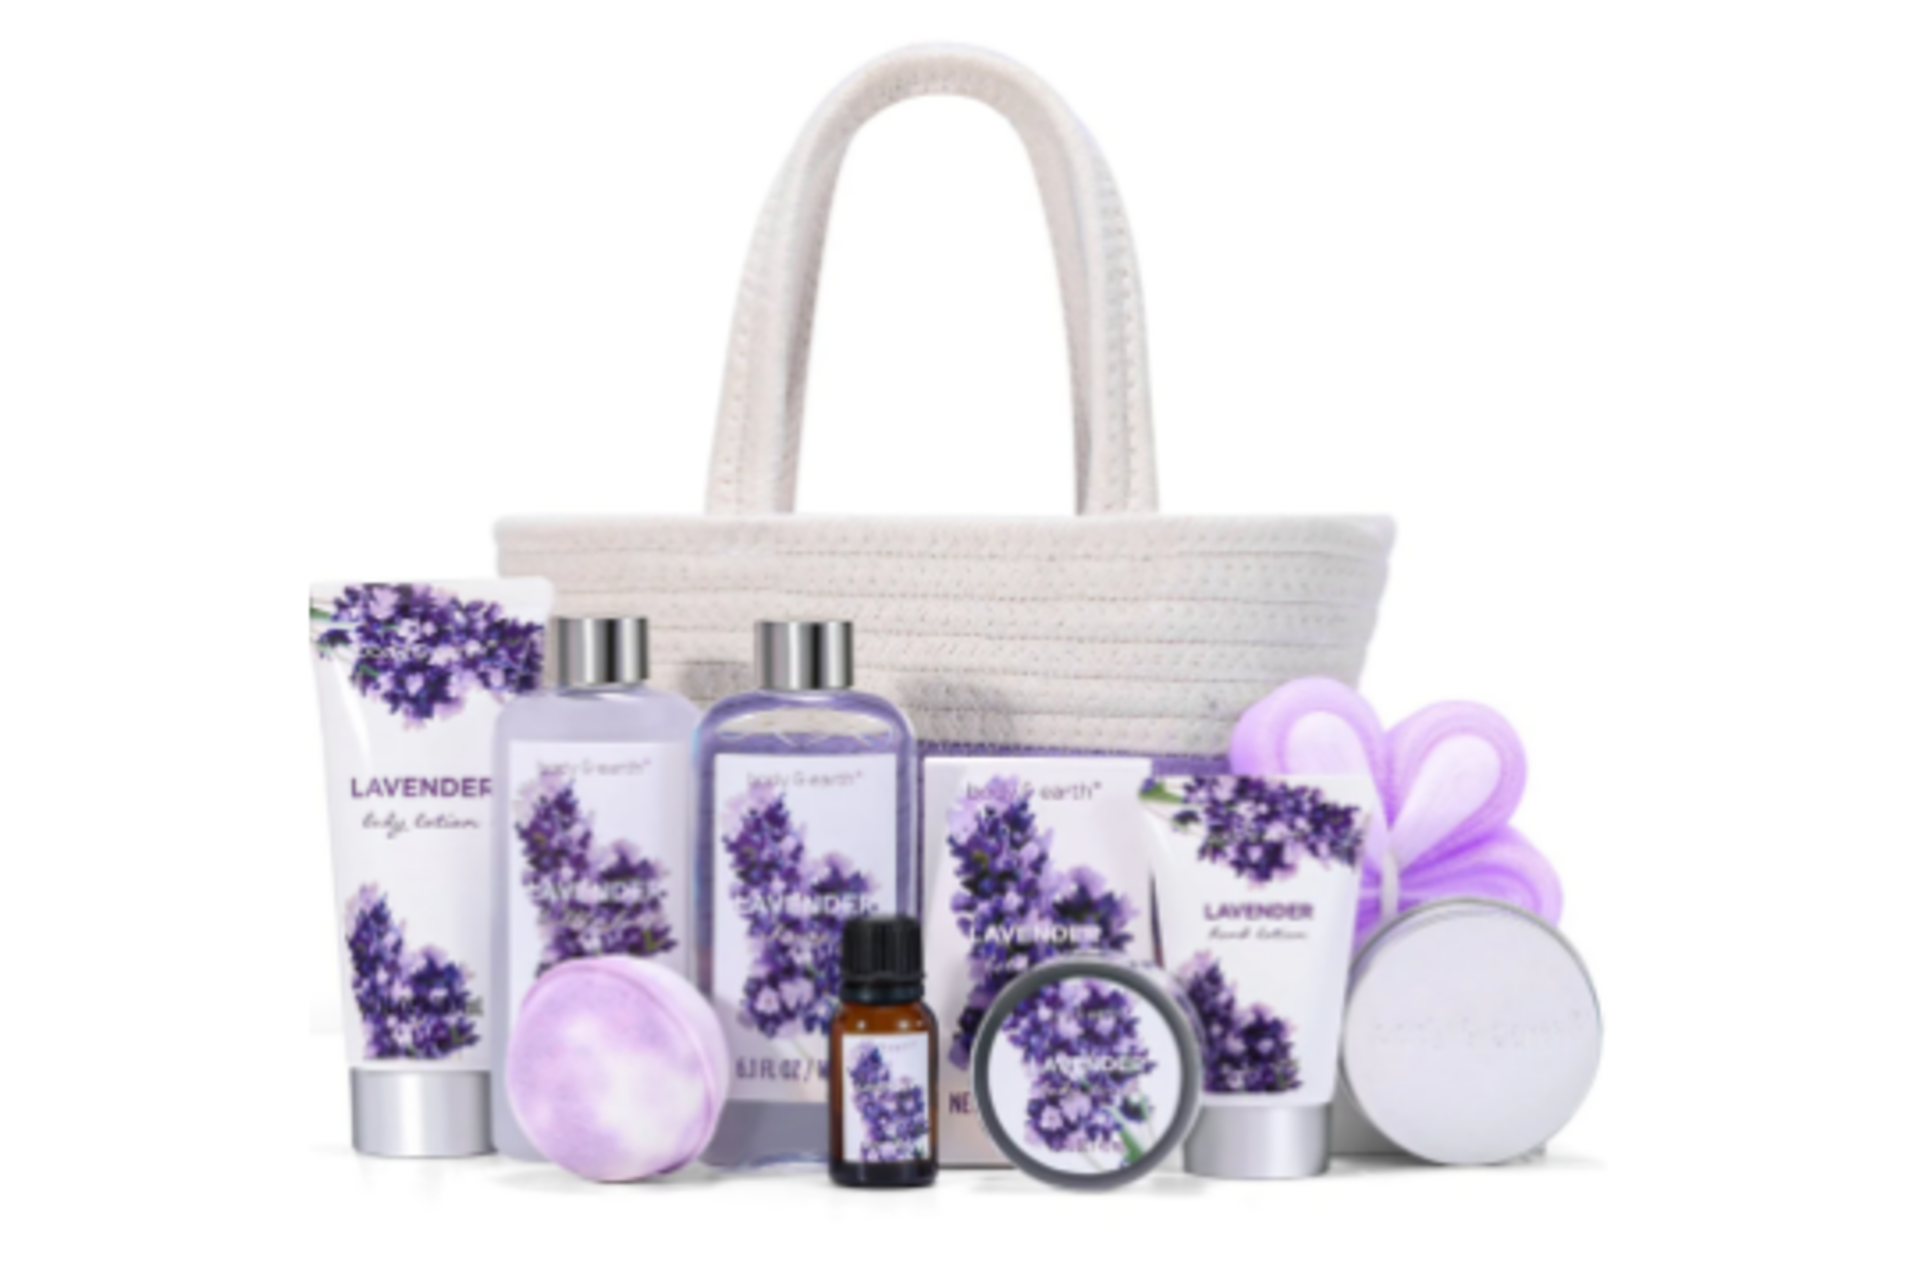 TRADE LOT 12 X NEW PACKAGED Body & Earth Lavender Spa Basket Set. (BE-BP-010) Nourishing